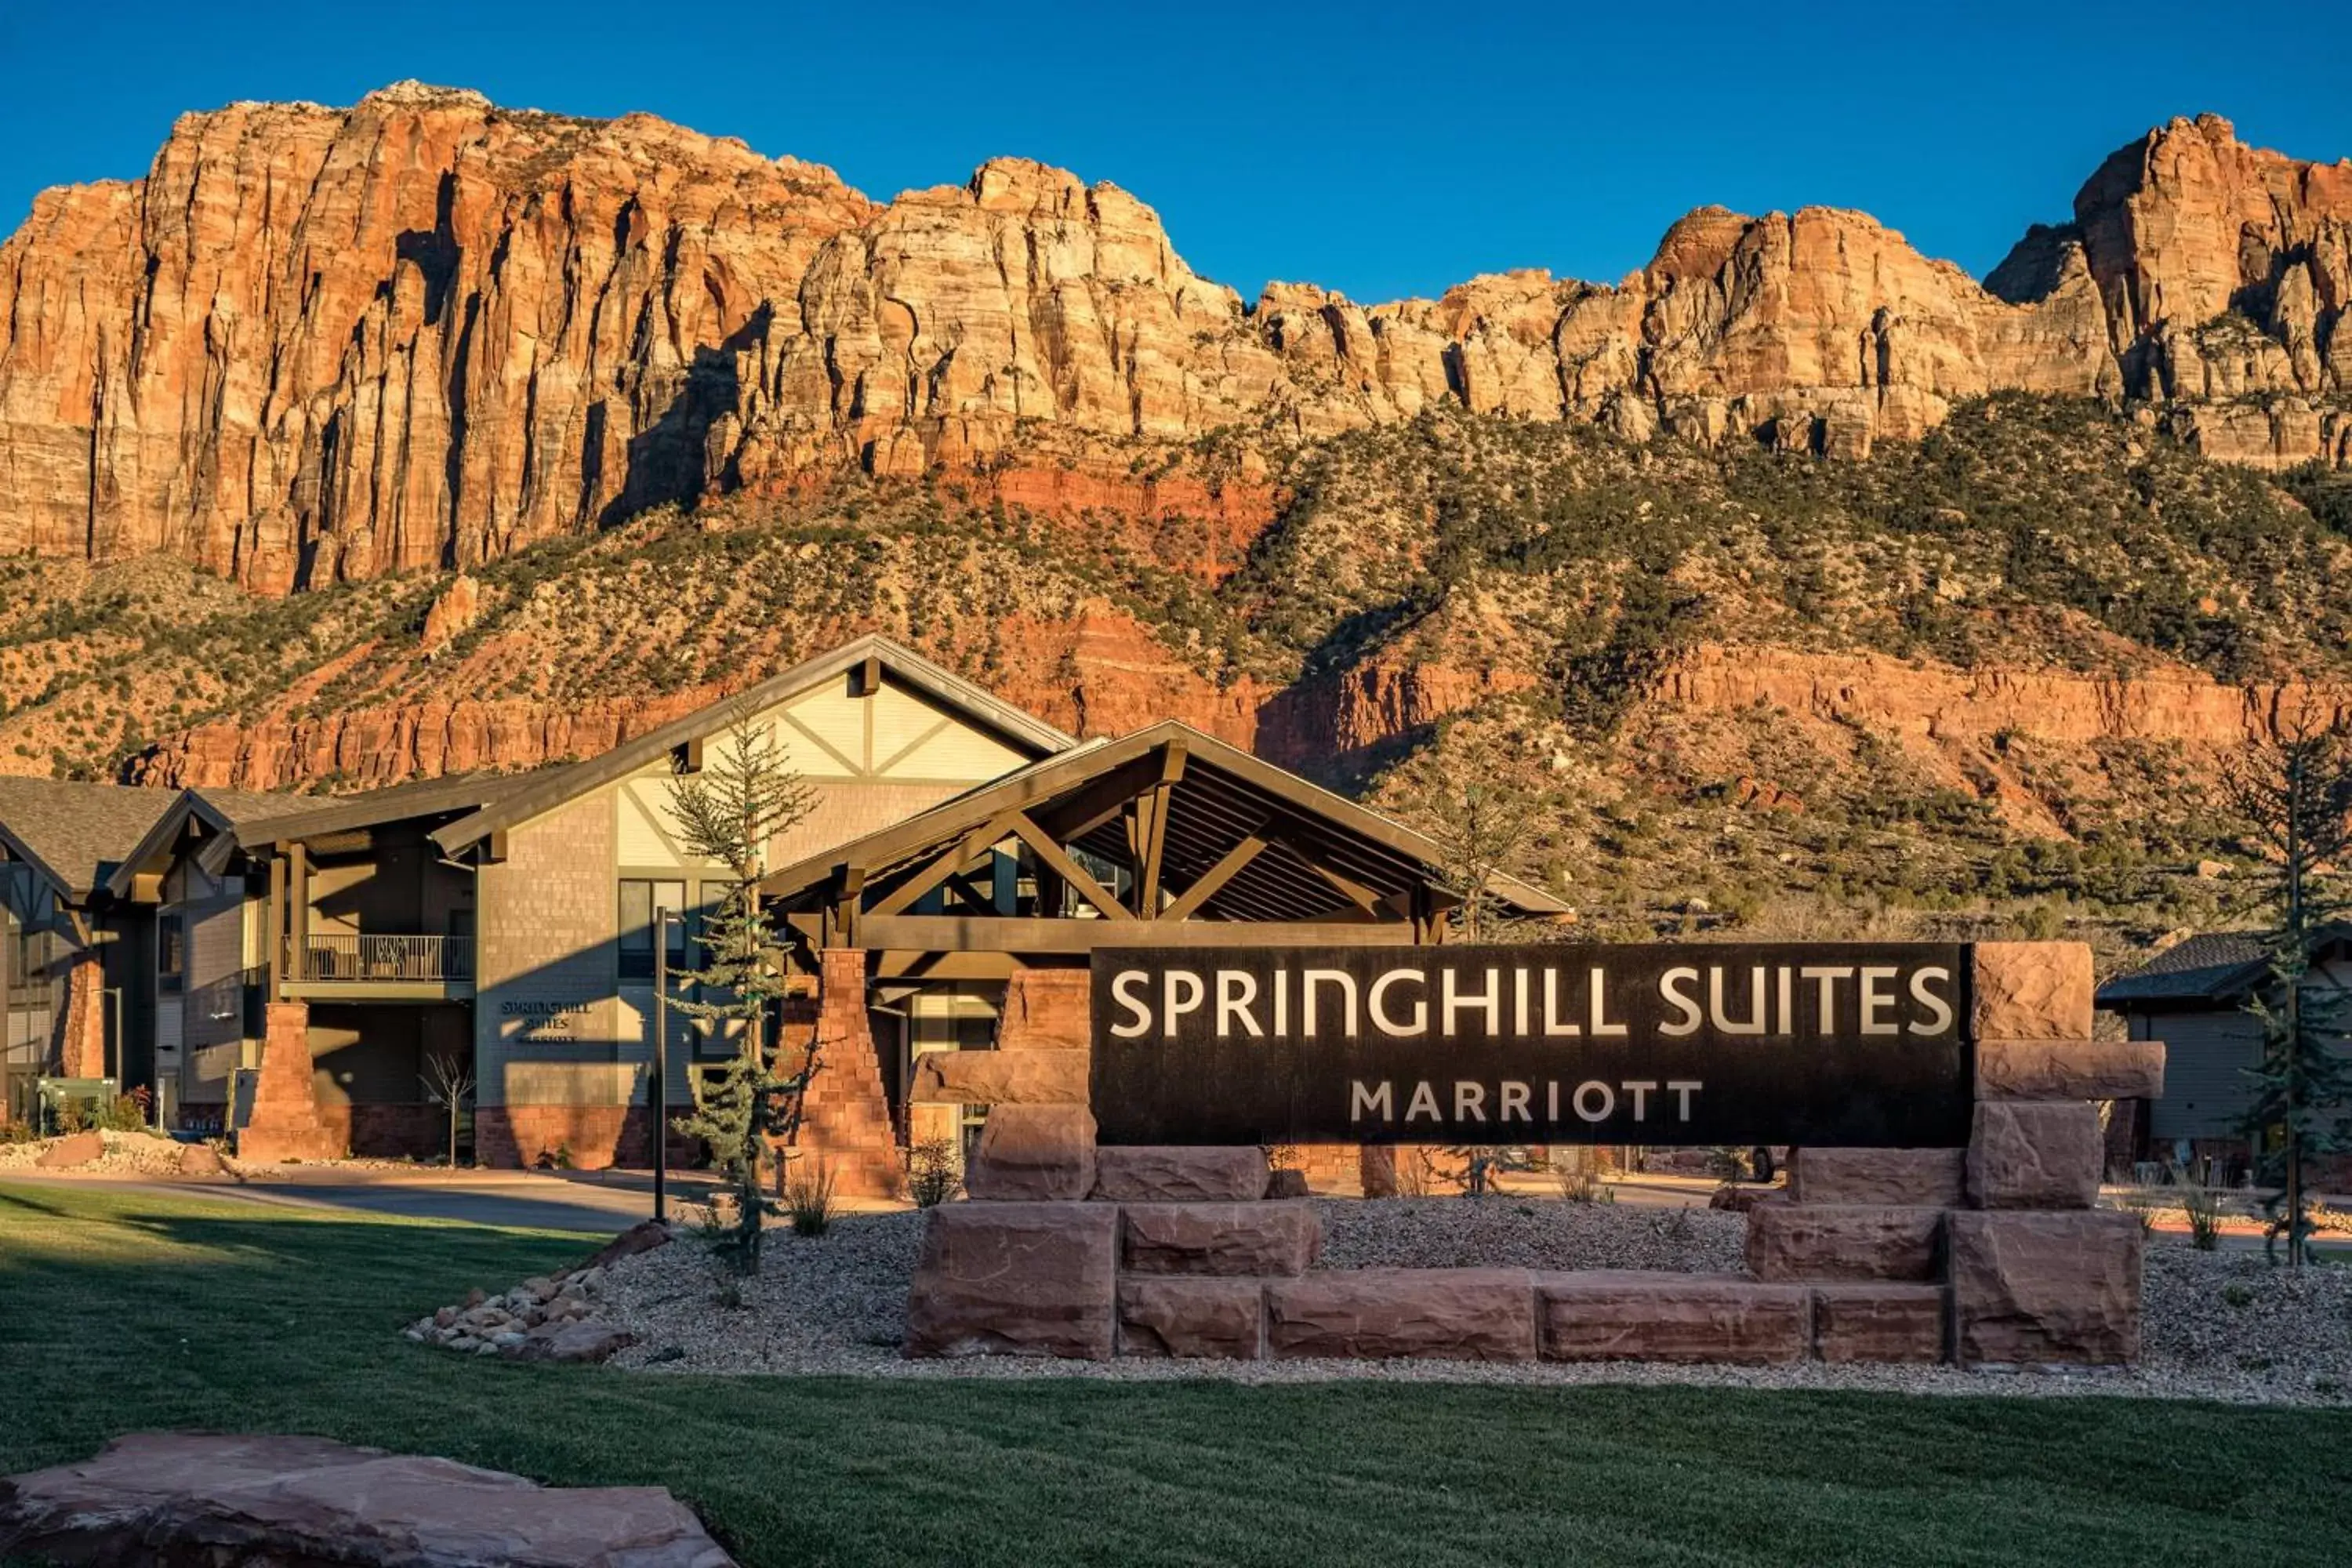 Property building in SpringHill Suites by Marriott Springdale Zion National Park